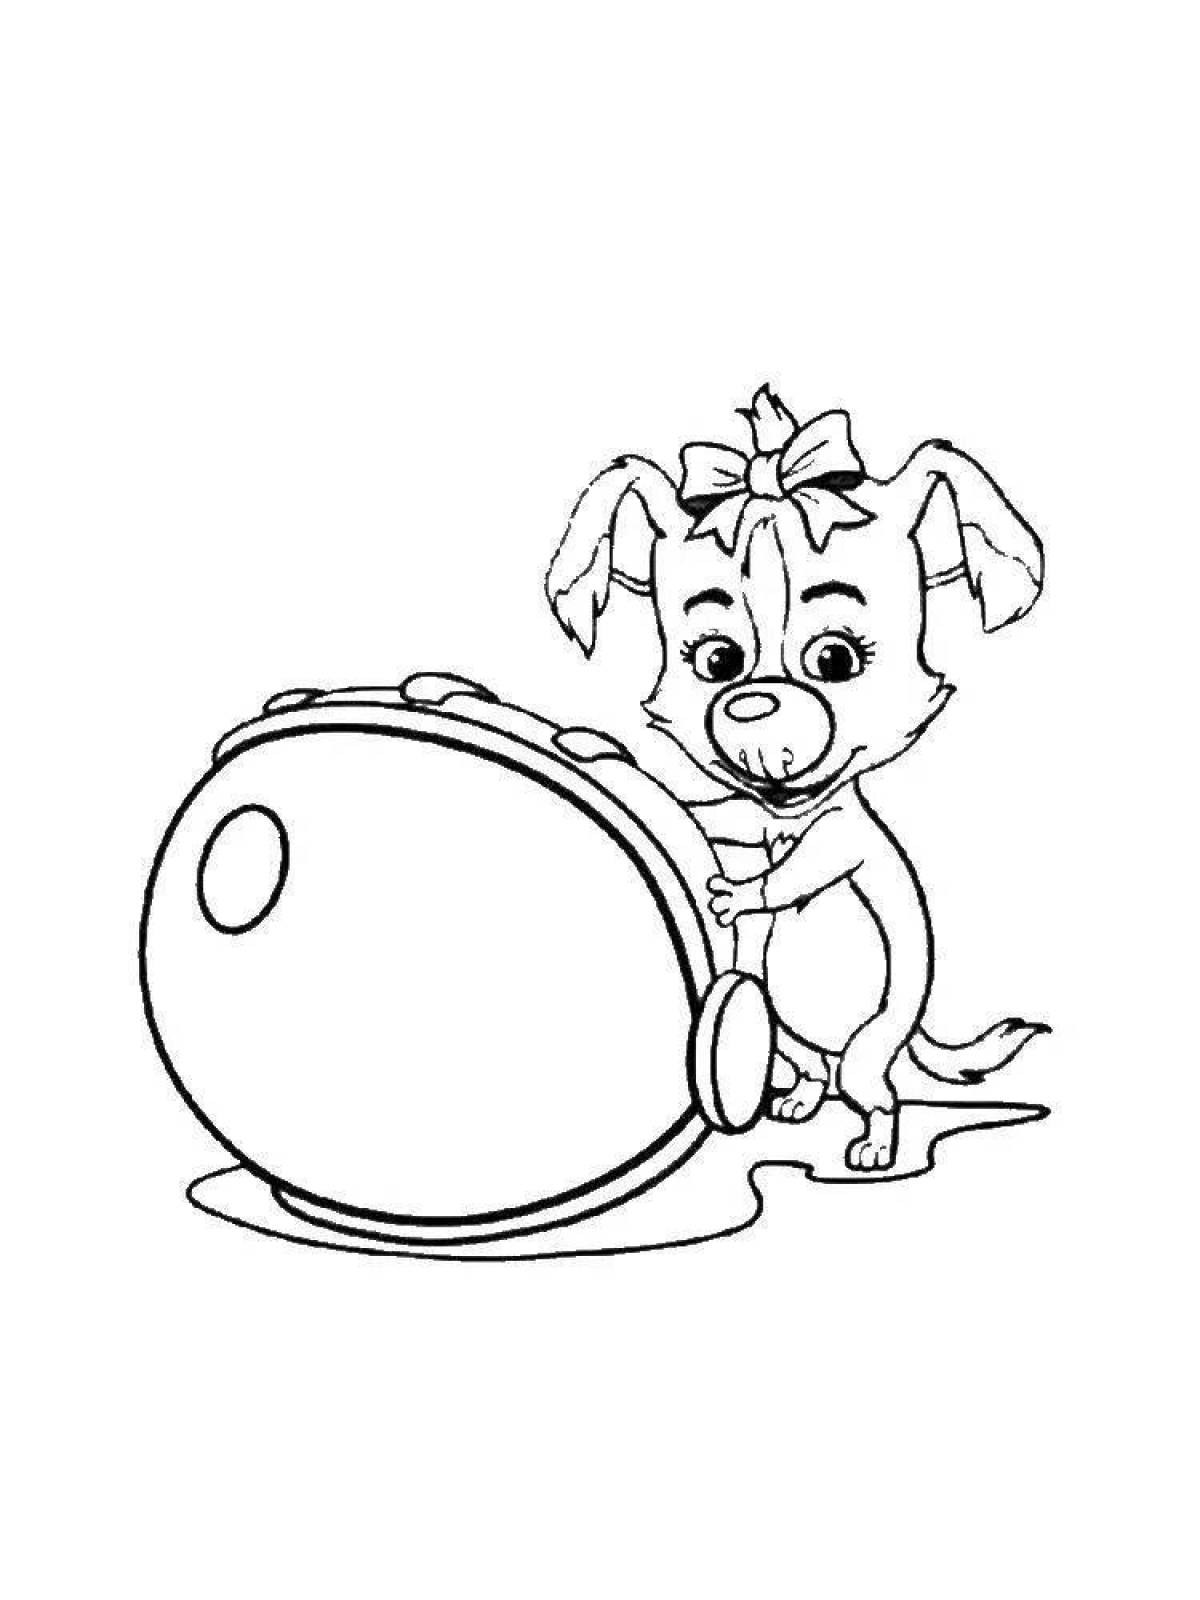 Coloring page enthusiastic squirrel and arrow